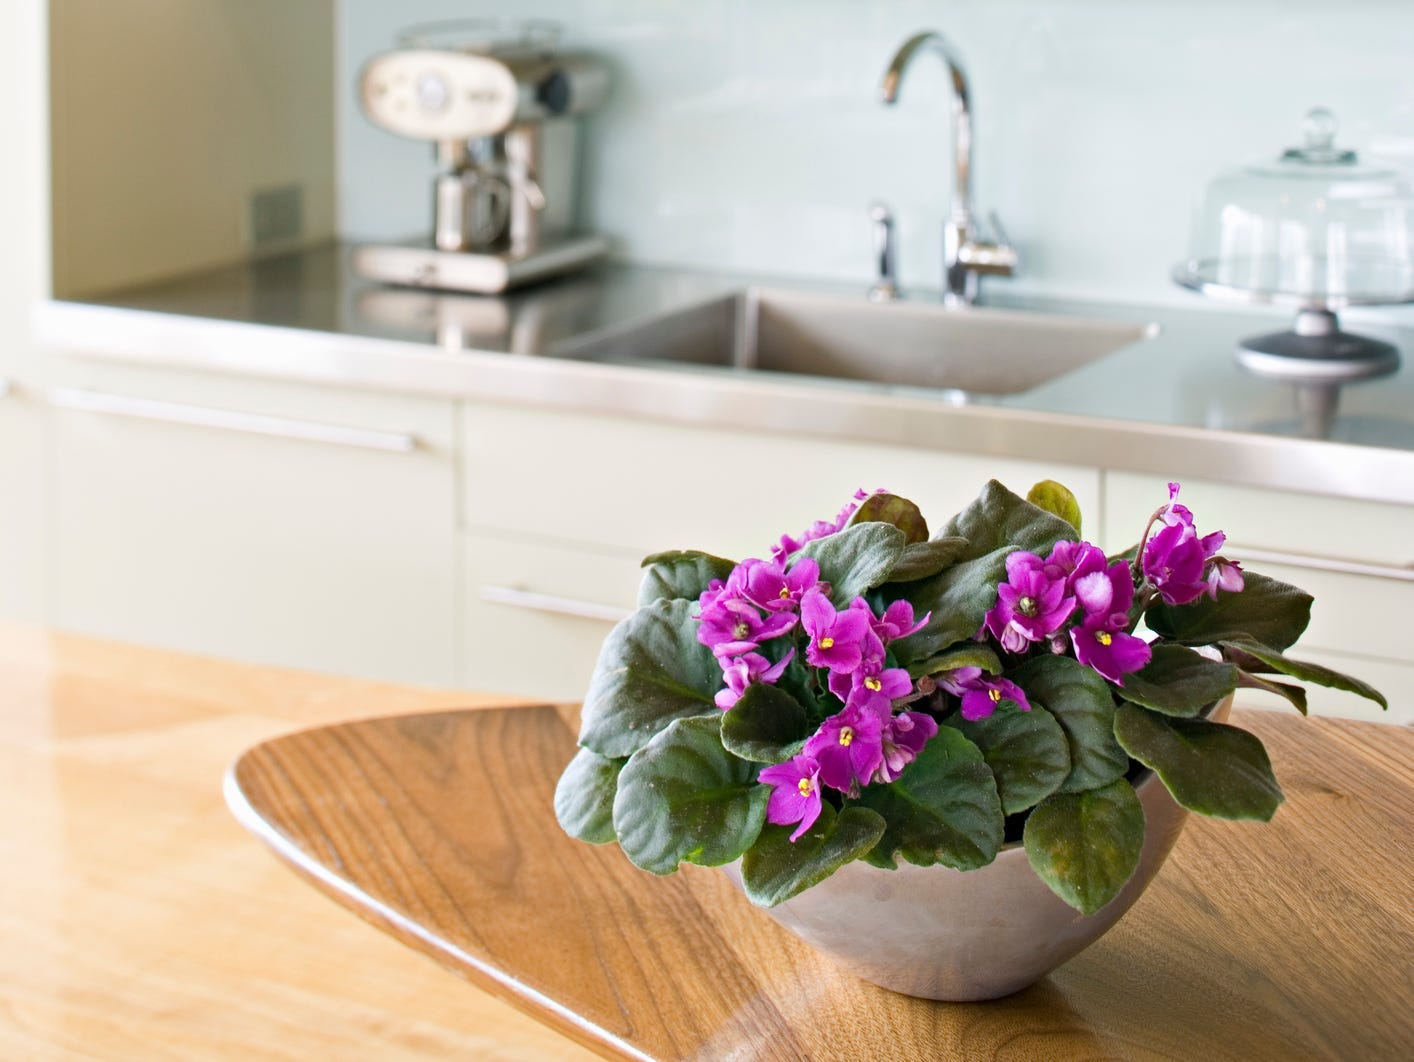 Potted African violet on a kitchen counter